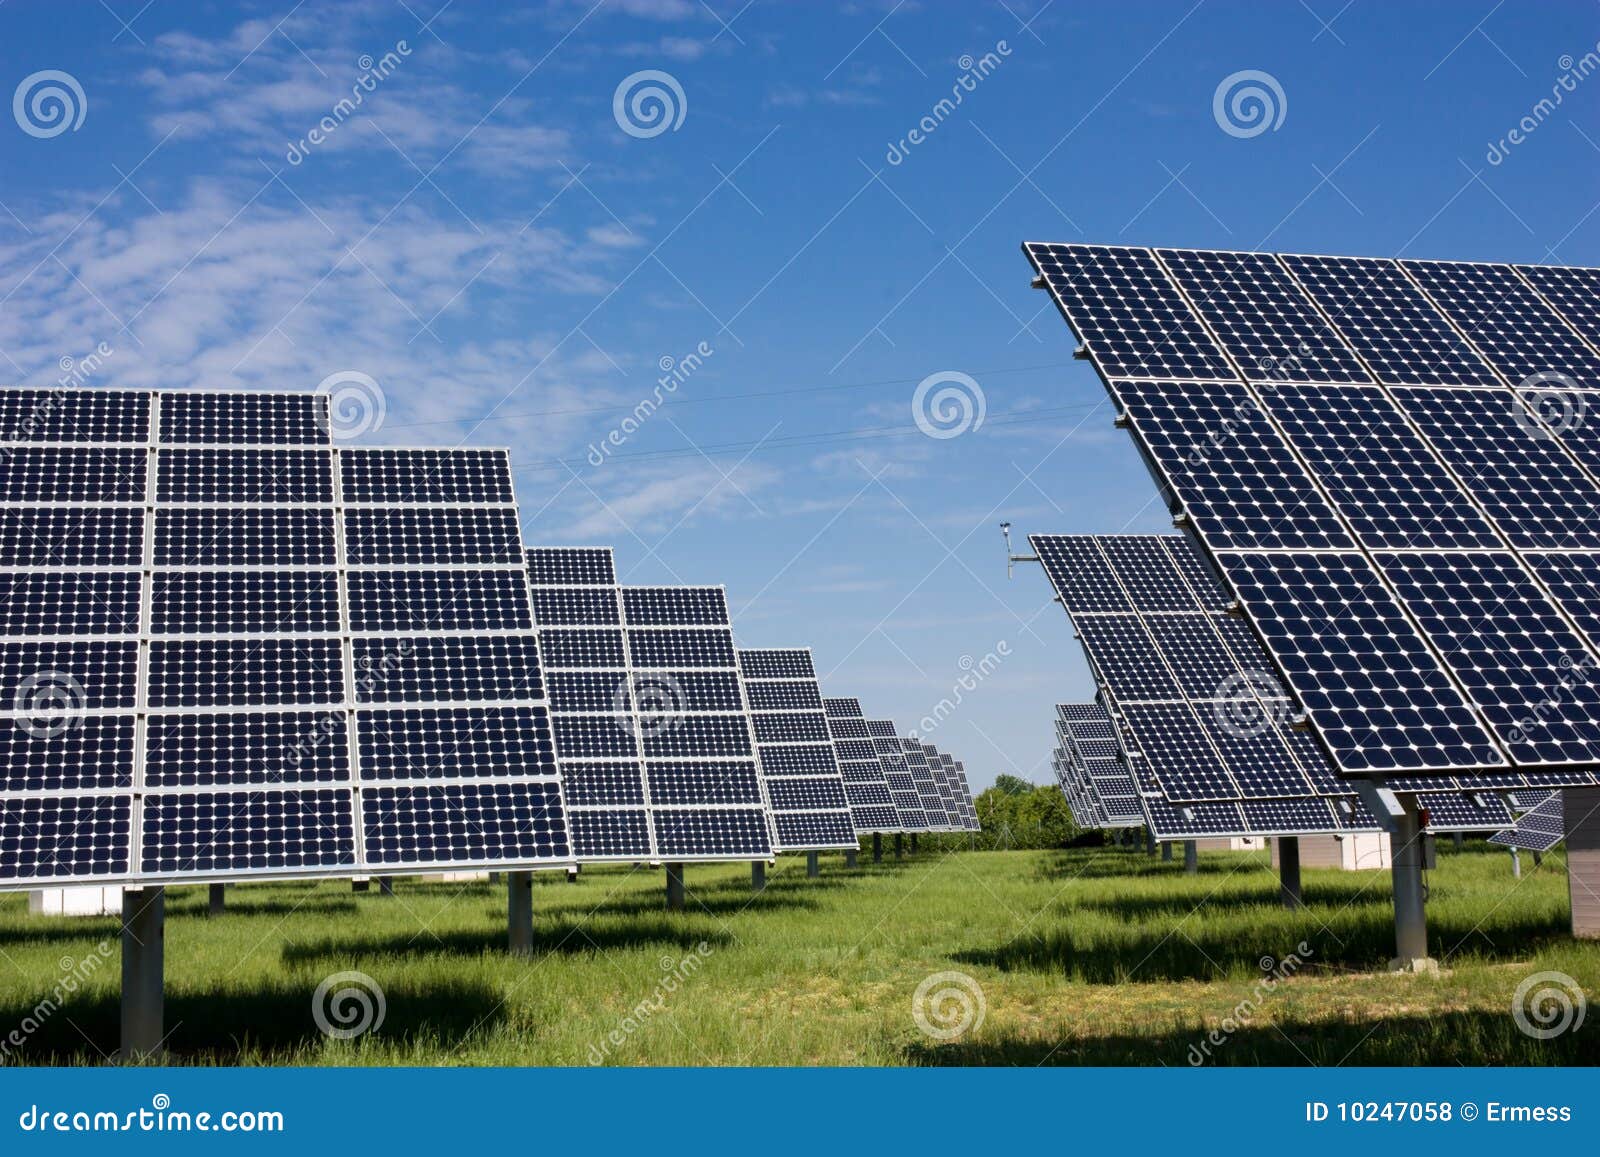 List of solar thermal power stations